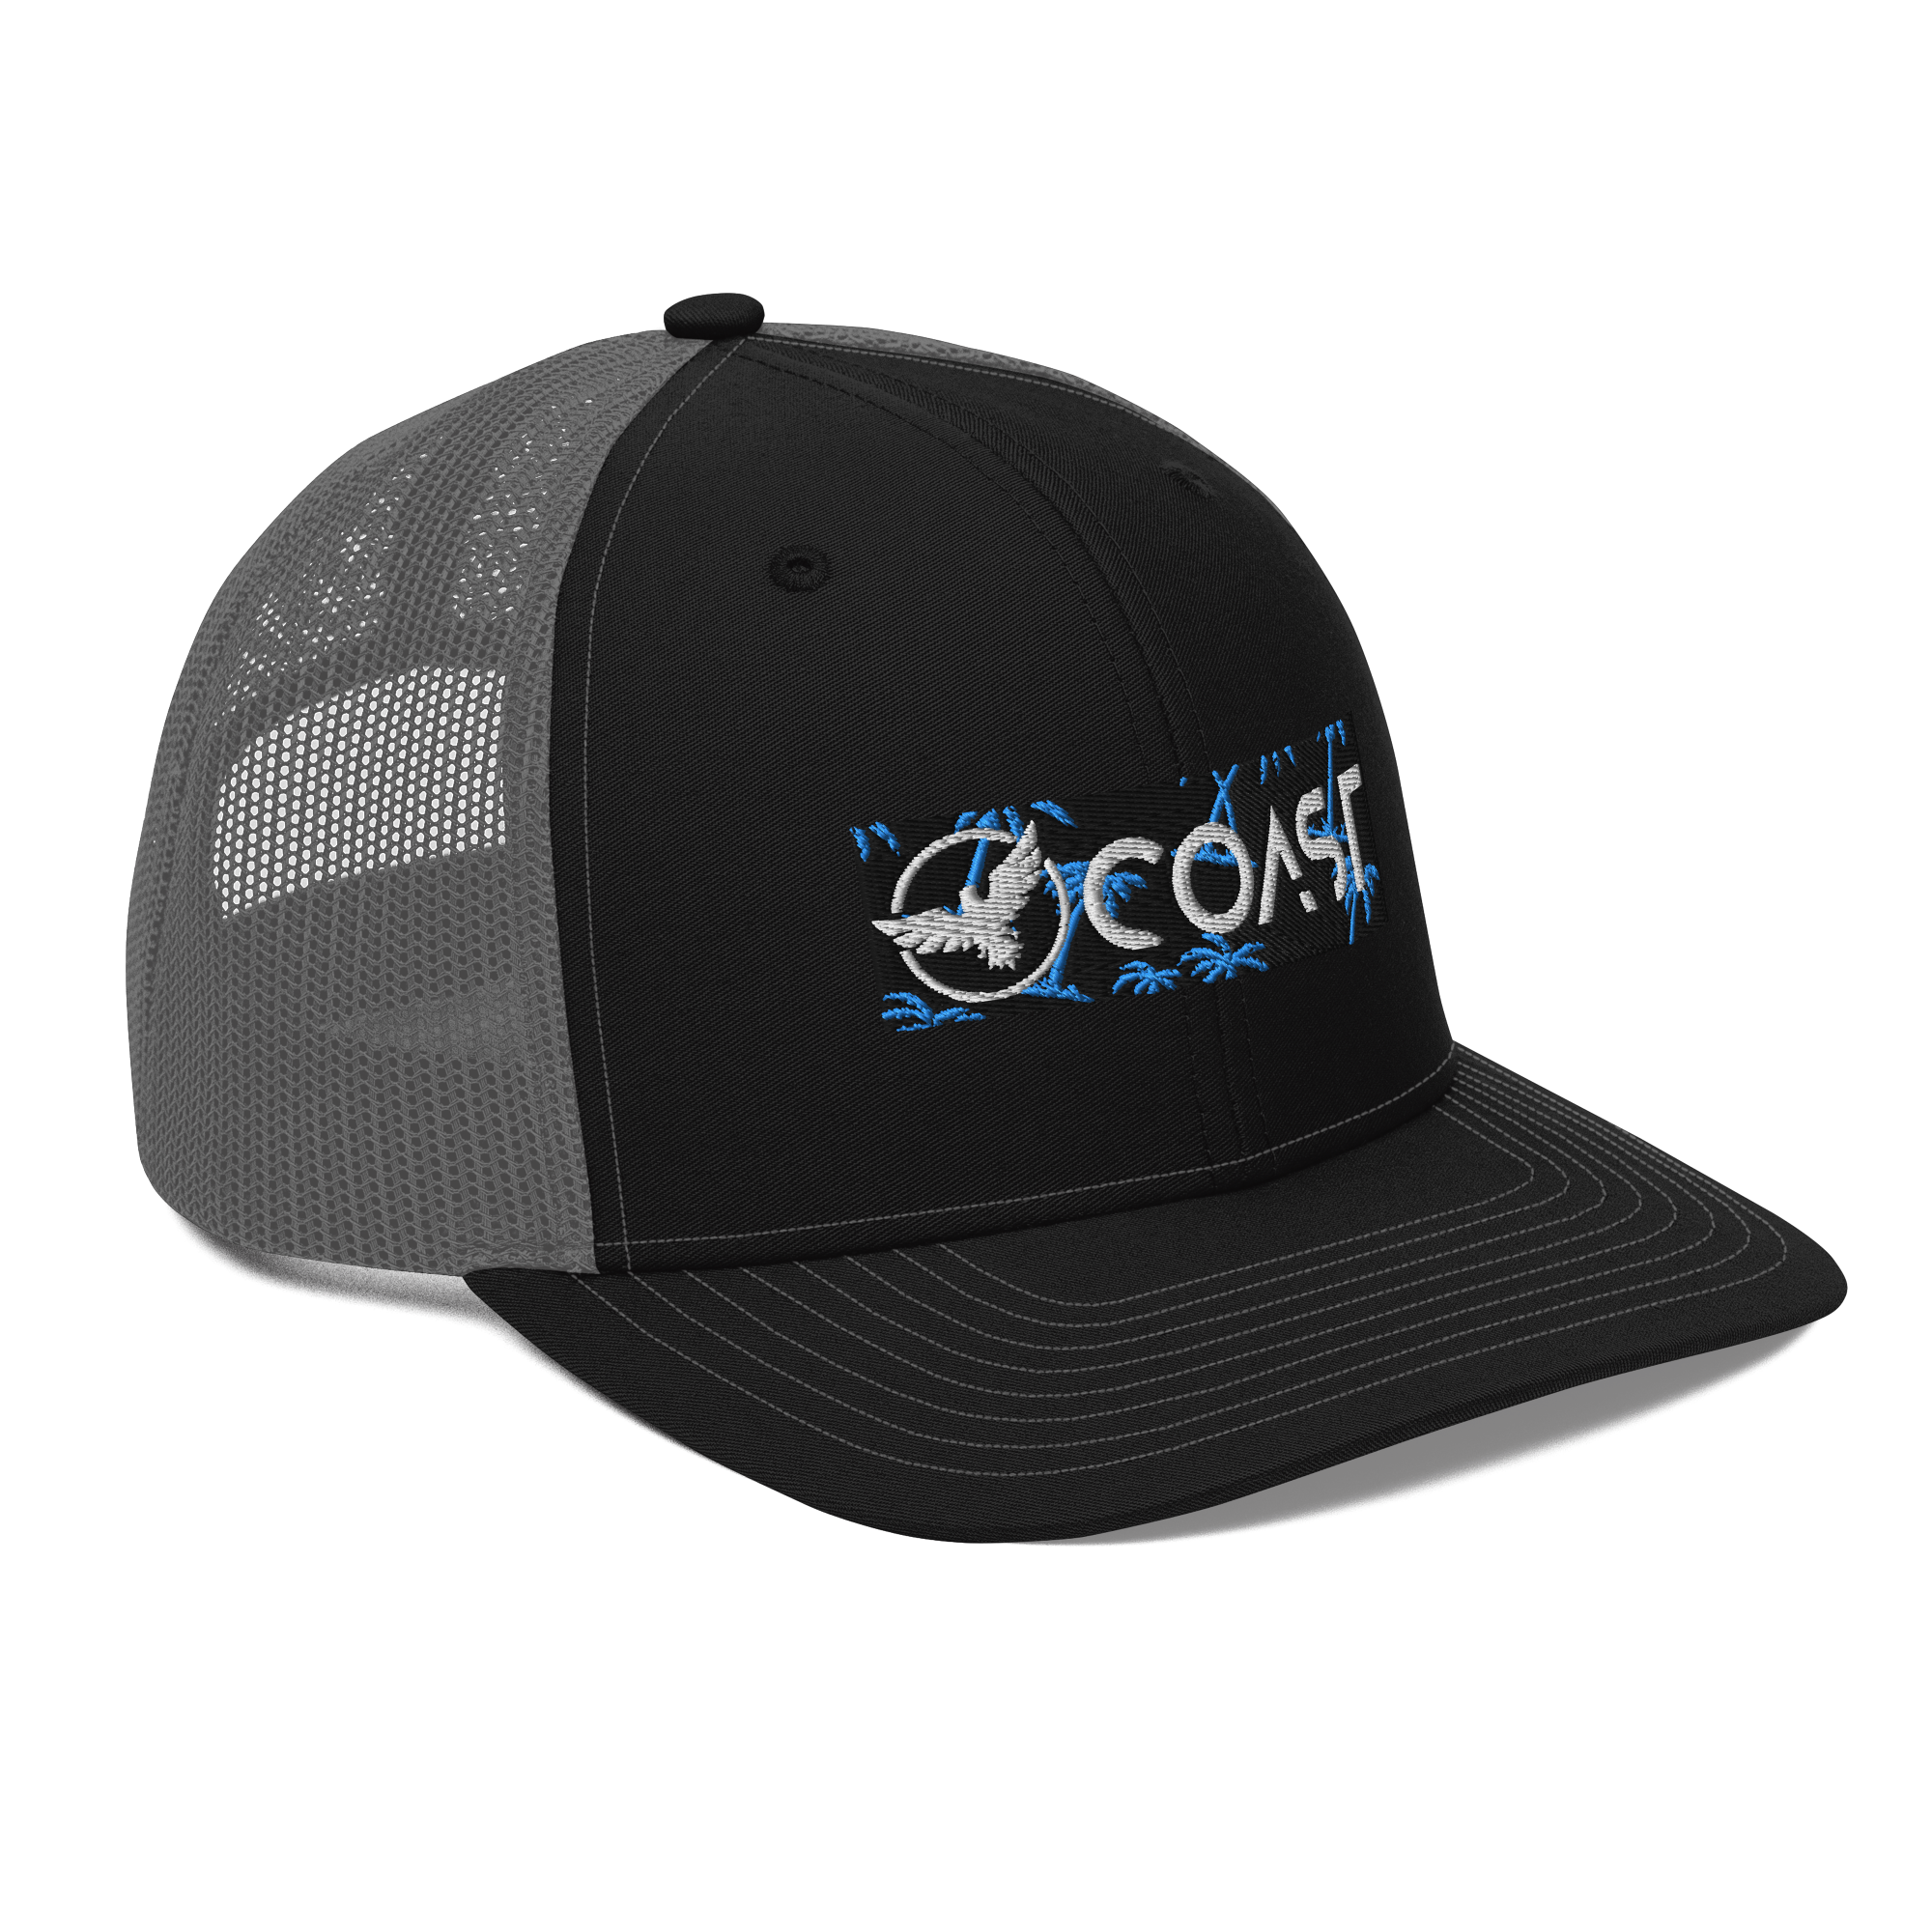 Find Your Coast® Palms Trucker Hats